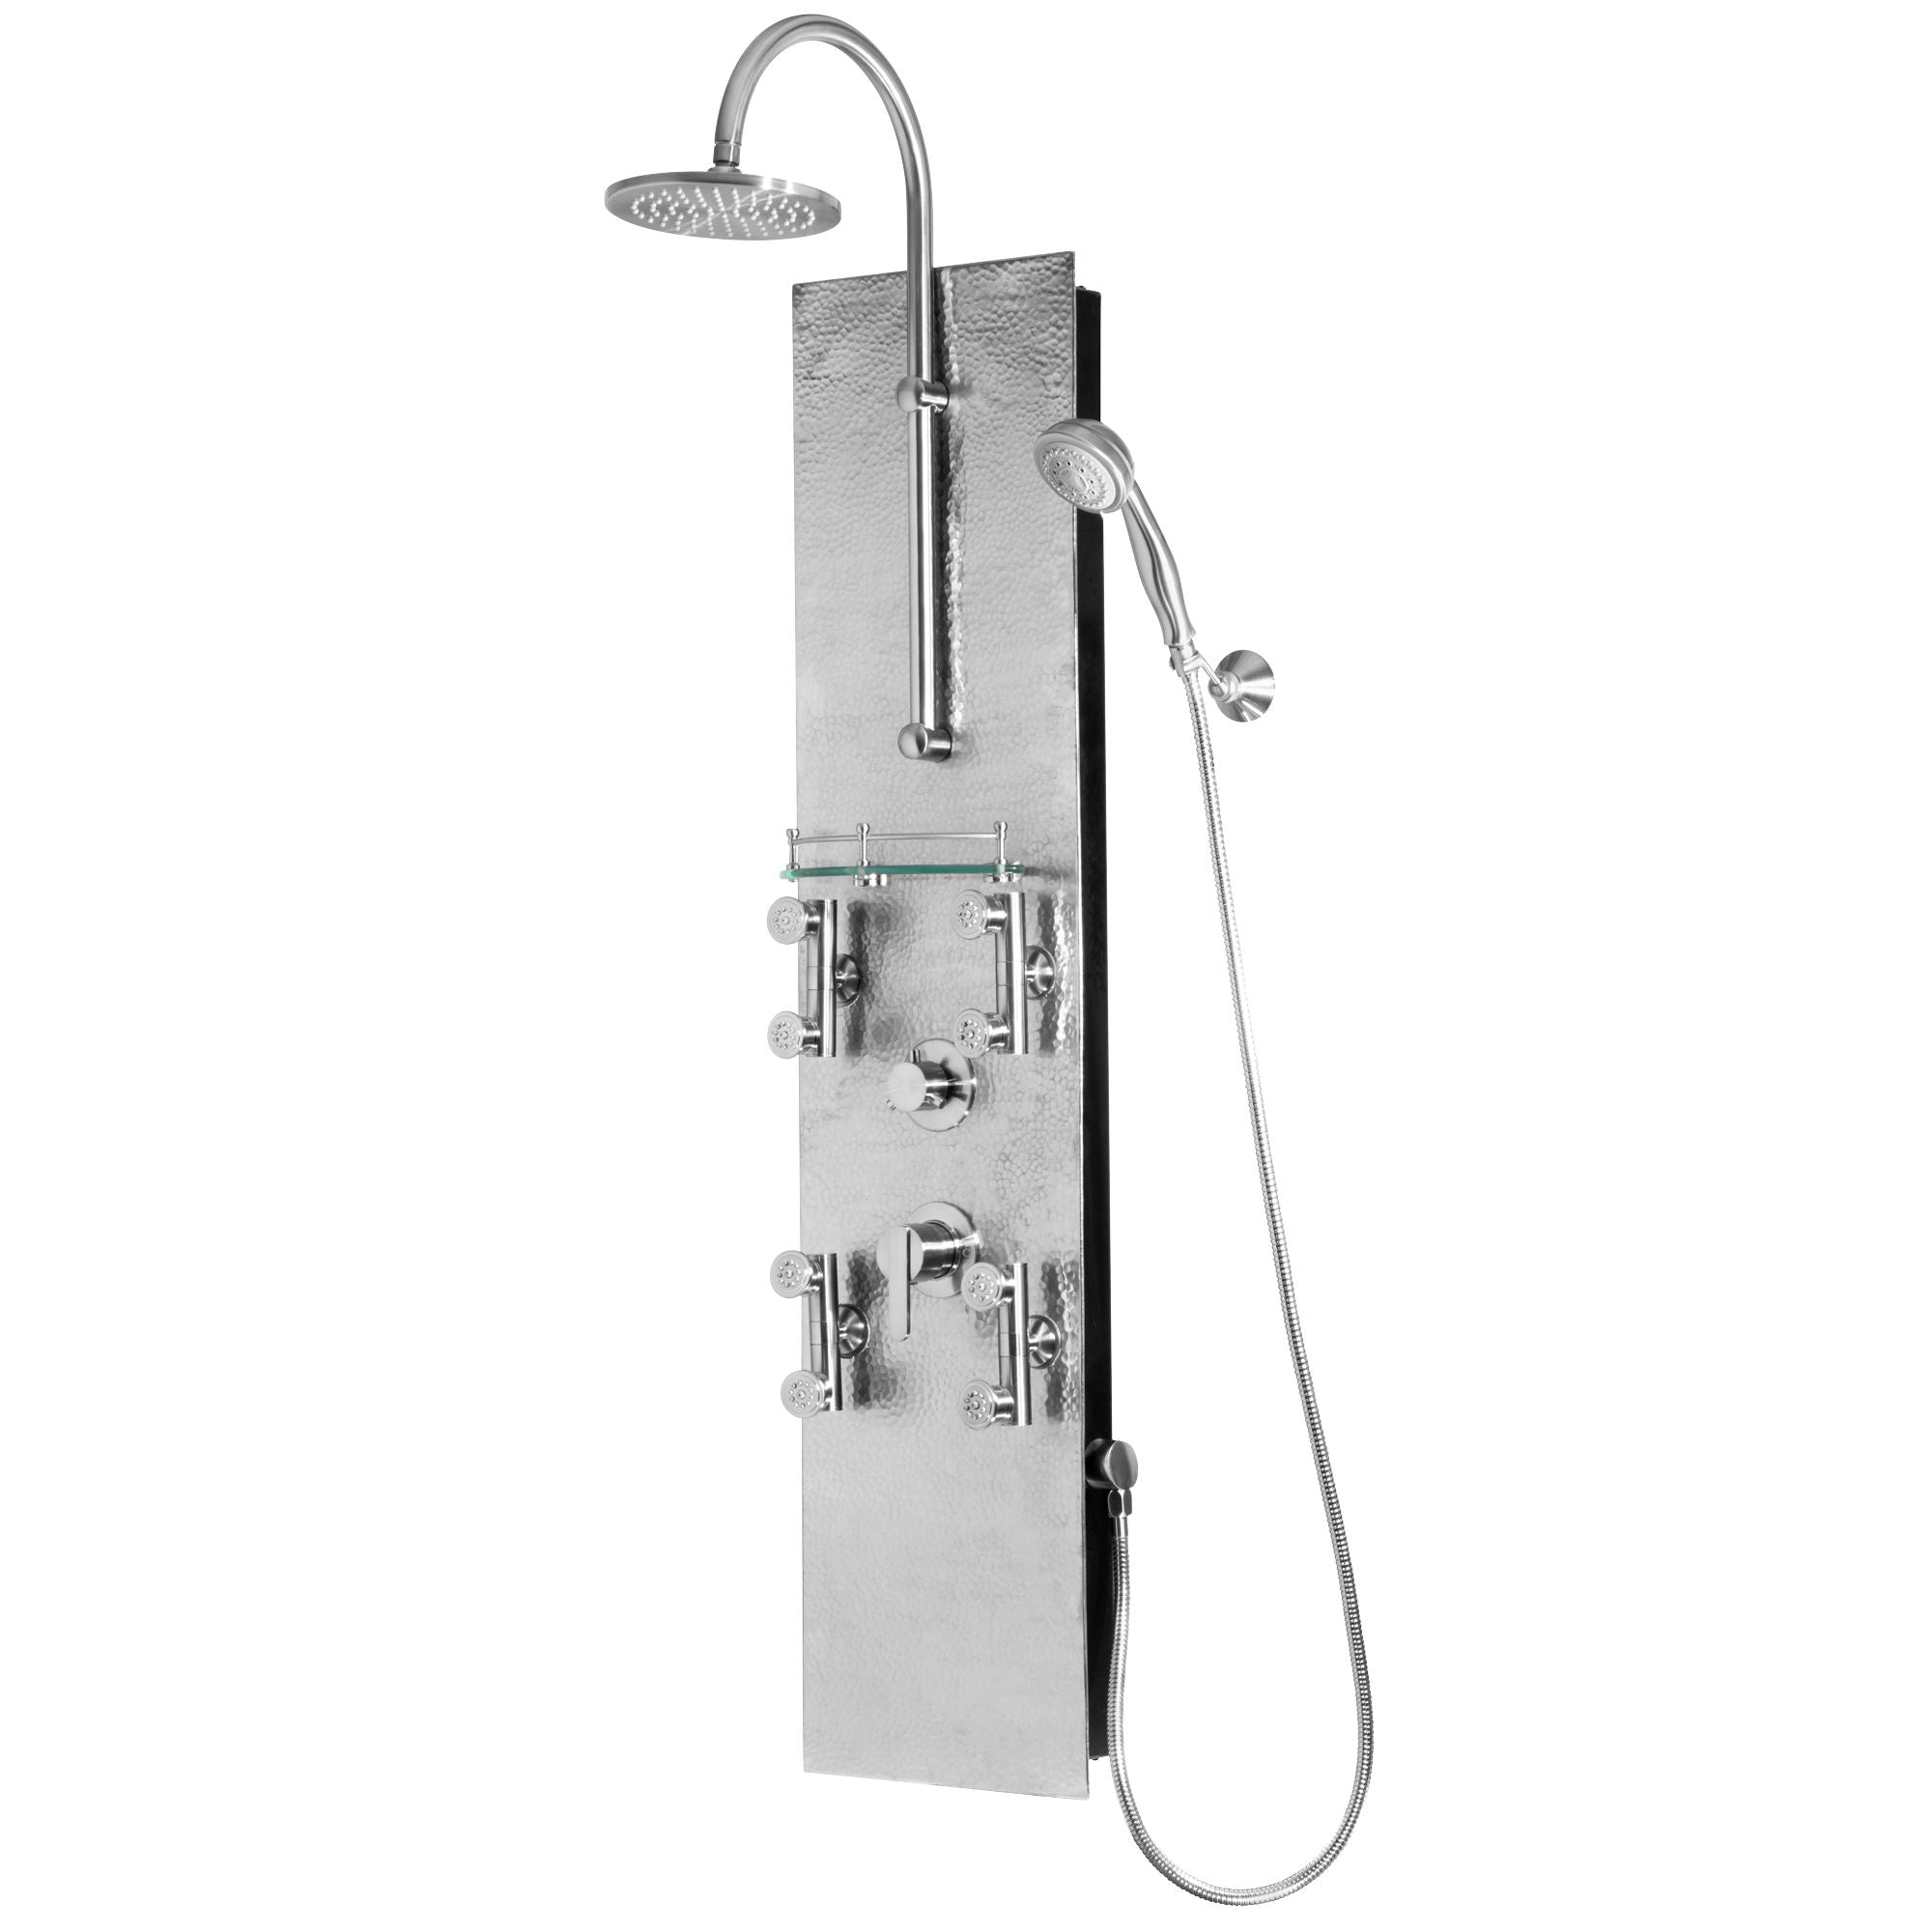 PULSE ShowerSpas Hammered Brushed Aluminum Shower Panel - Vaquero ShowerSpa - Hand-forged hammered brushed aluminum panel accented with Brushed Nickel components - with 8" Rain showerhead with soft tips, 4 Dual-head brass body jets, Five-function hand shower with double-interlocking stainless steel hose, Brass diverter, Built-in glass shelf with Brushed Nickel accents - 1027 - Vital Hydrotherapy